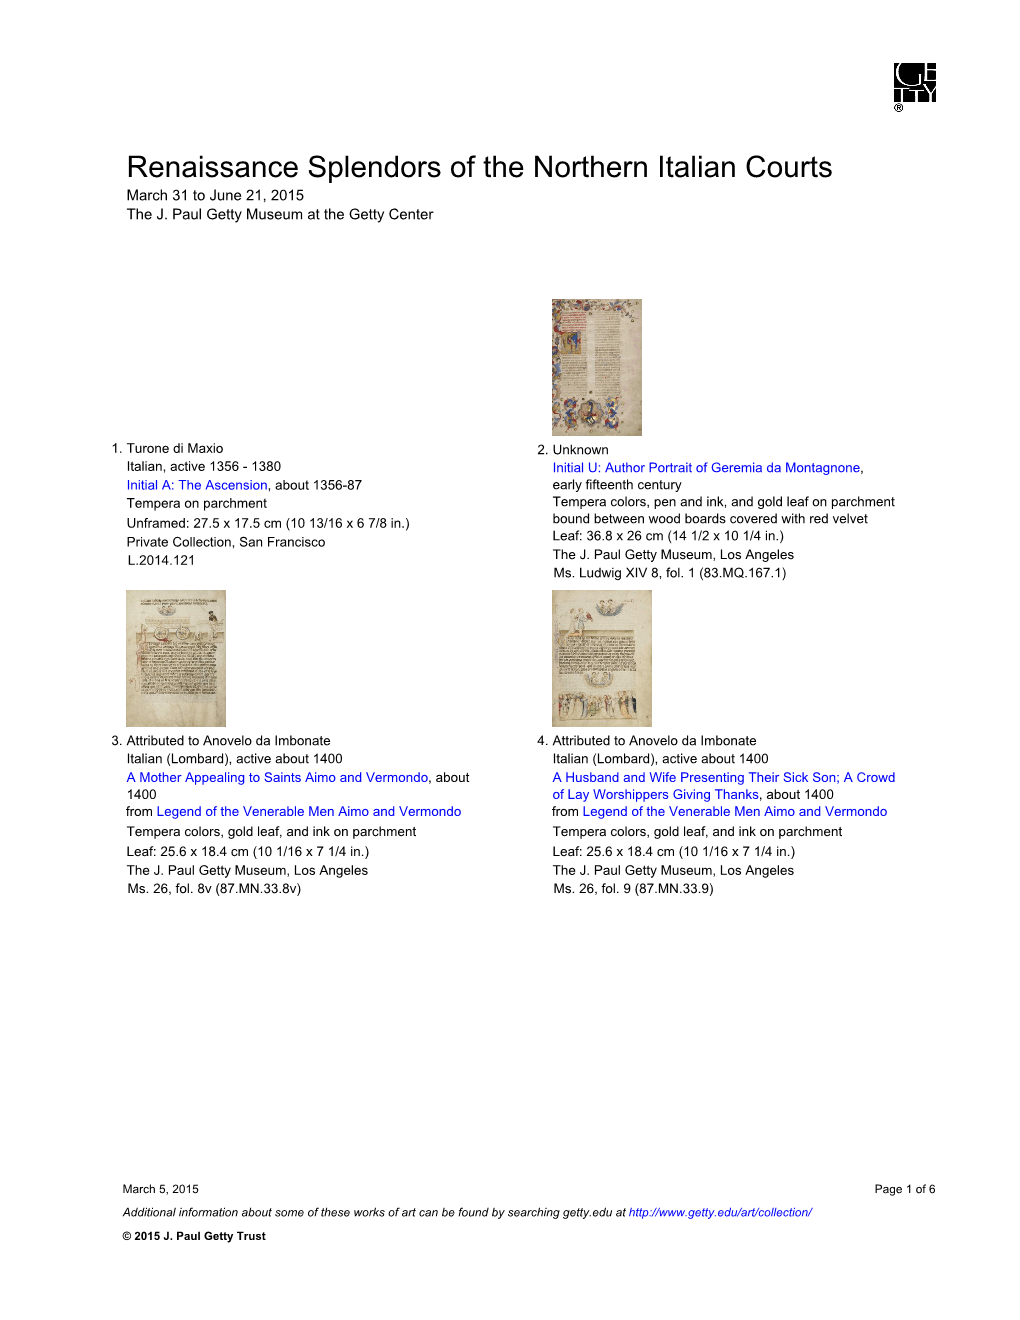 Renaissance Splendors of the Northern Italian Courts March 31 to June 21, 2015 the J